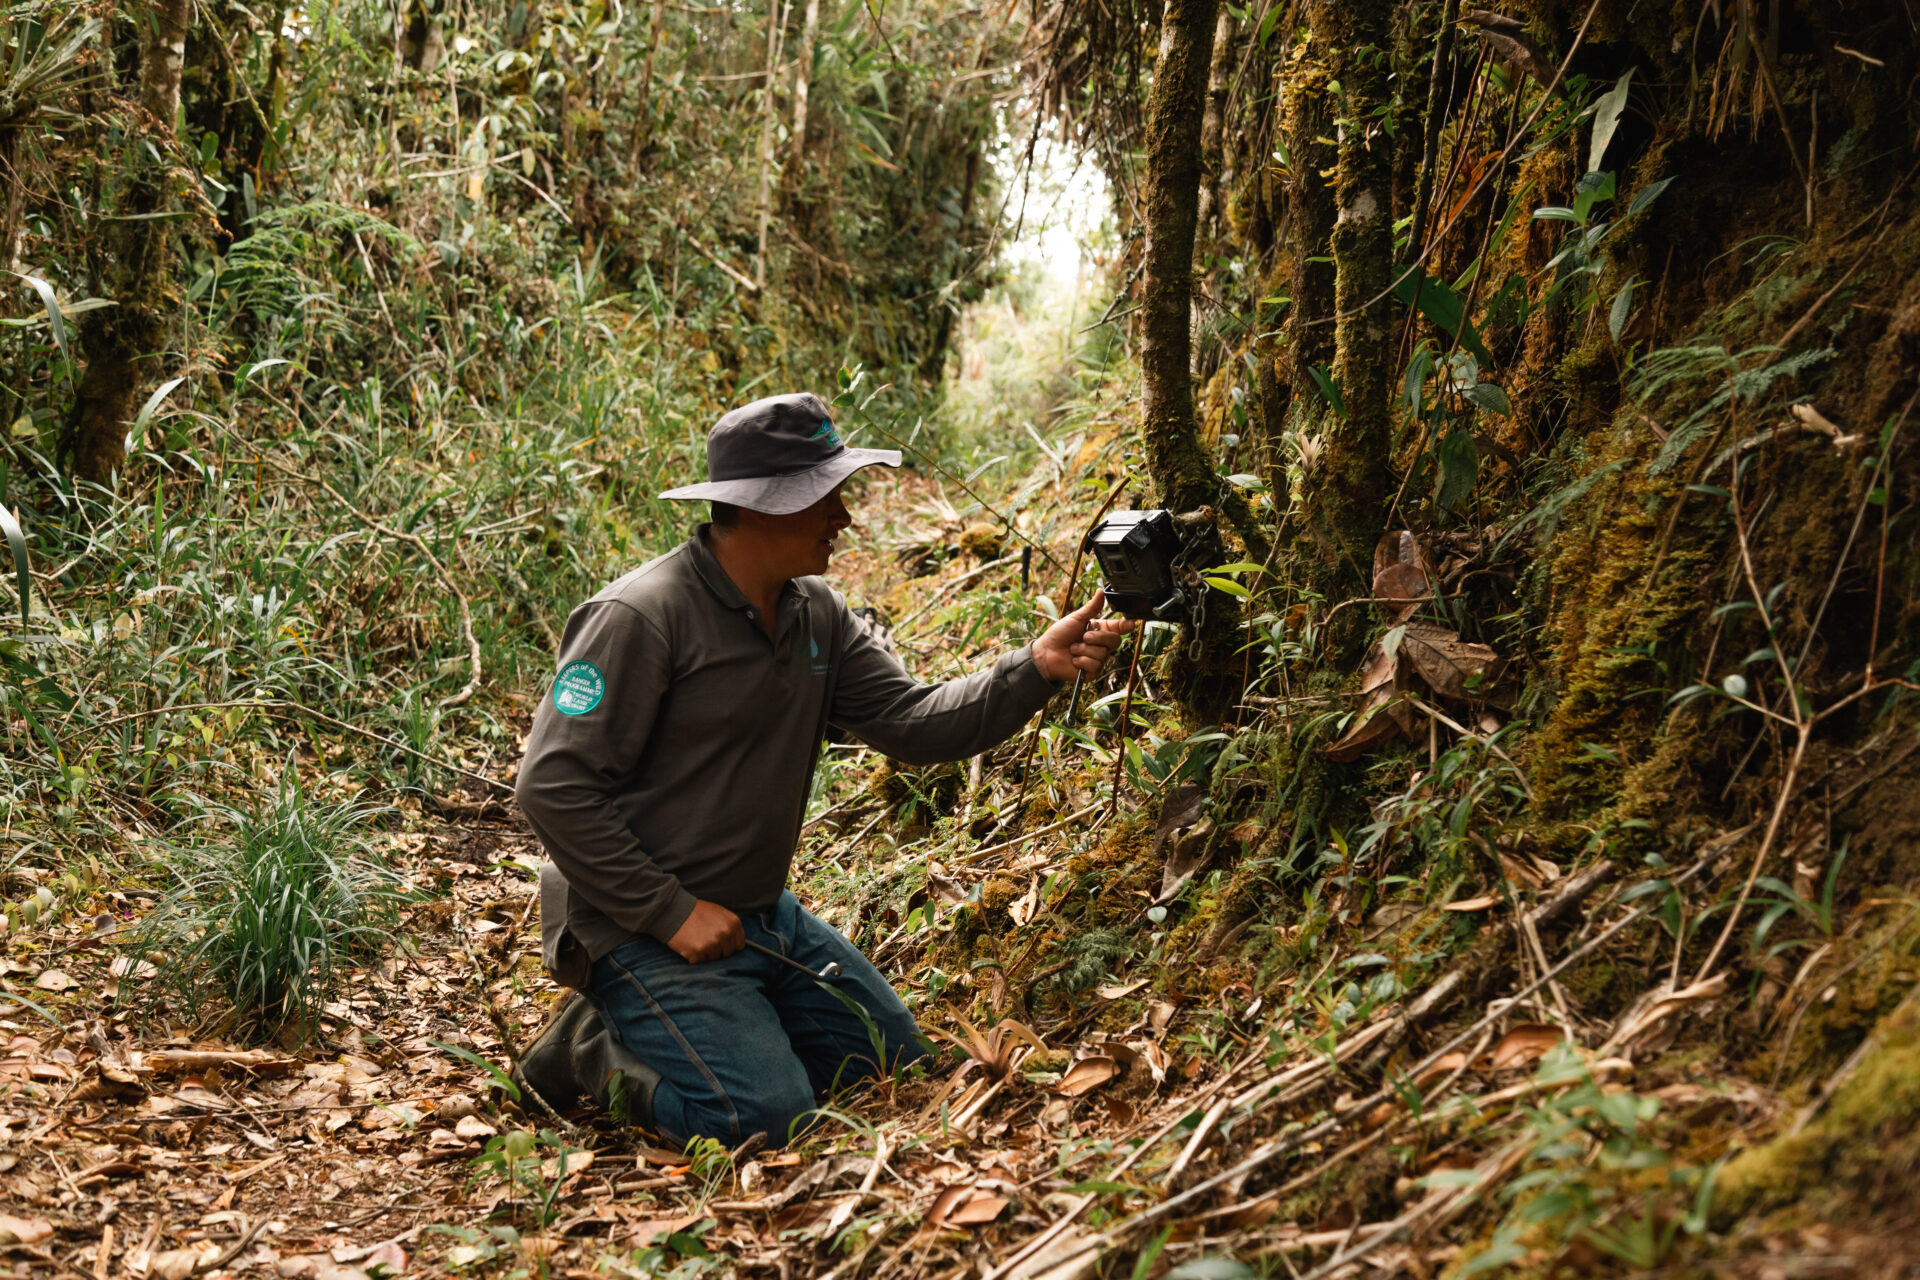 Ranger kneeling on the forest floor setting up a camera trap device. 